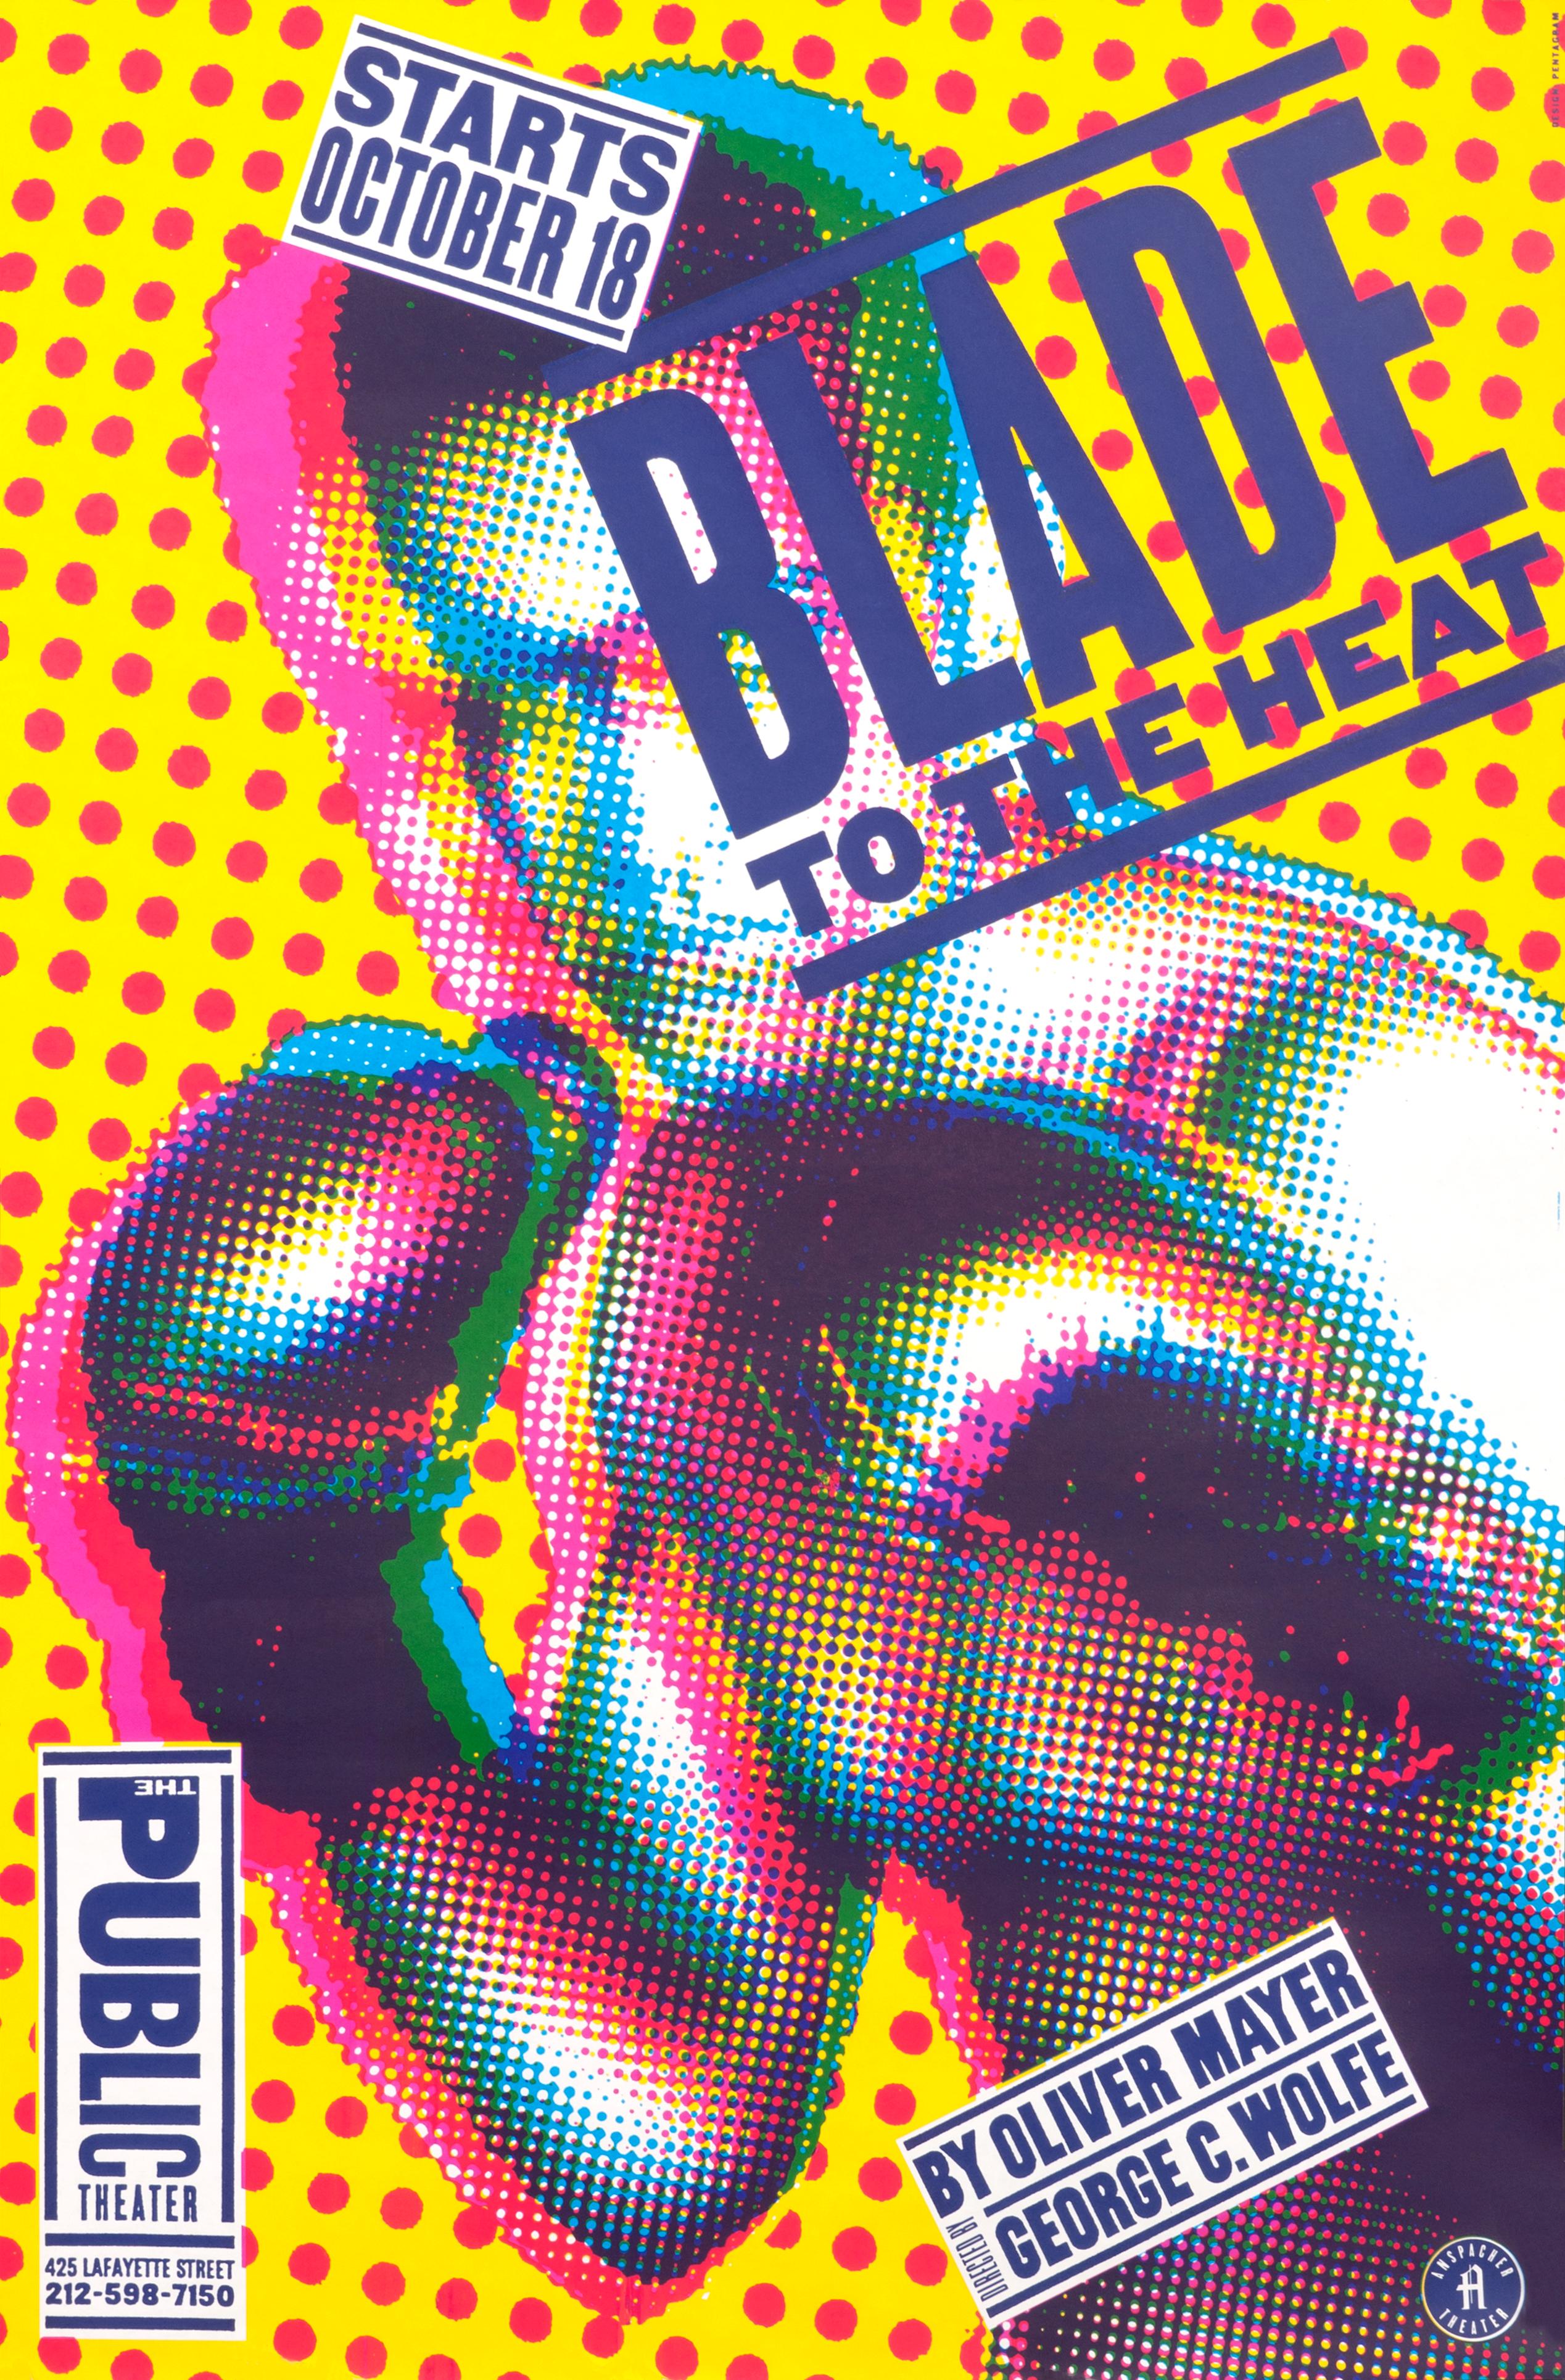 "Blade to the Heat by Oliver Mayer - Public Theater" Original Boxing Poster - Print by Paula Scher